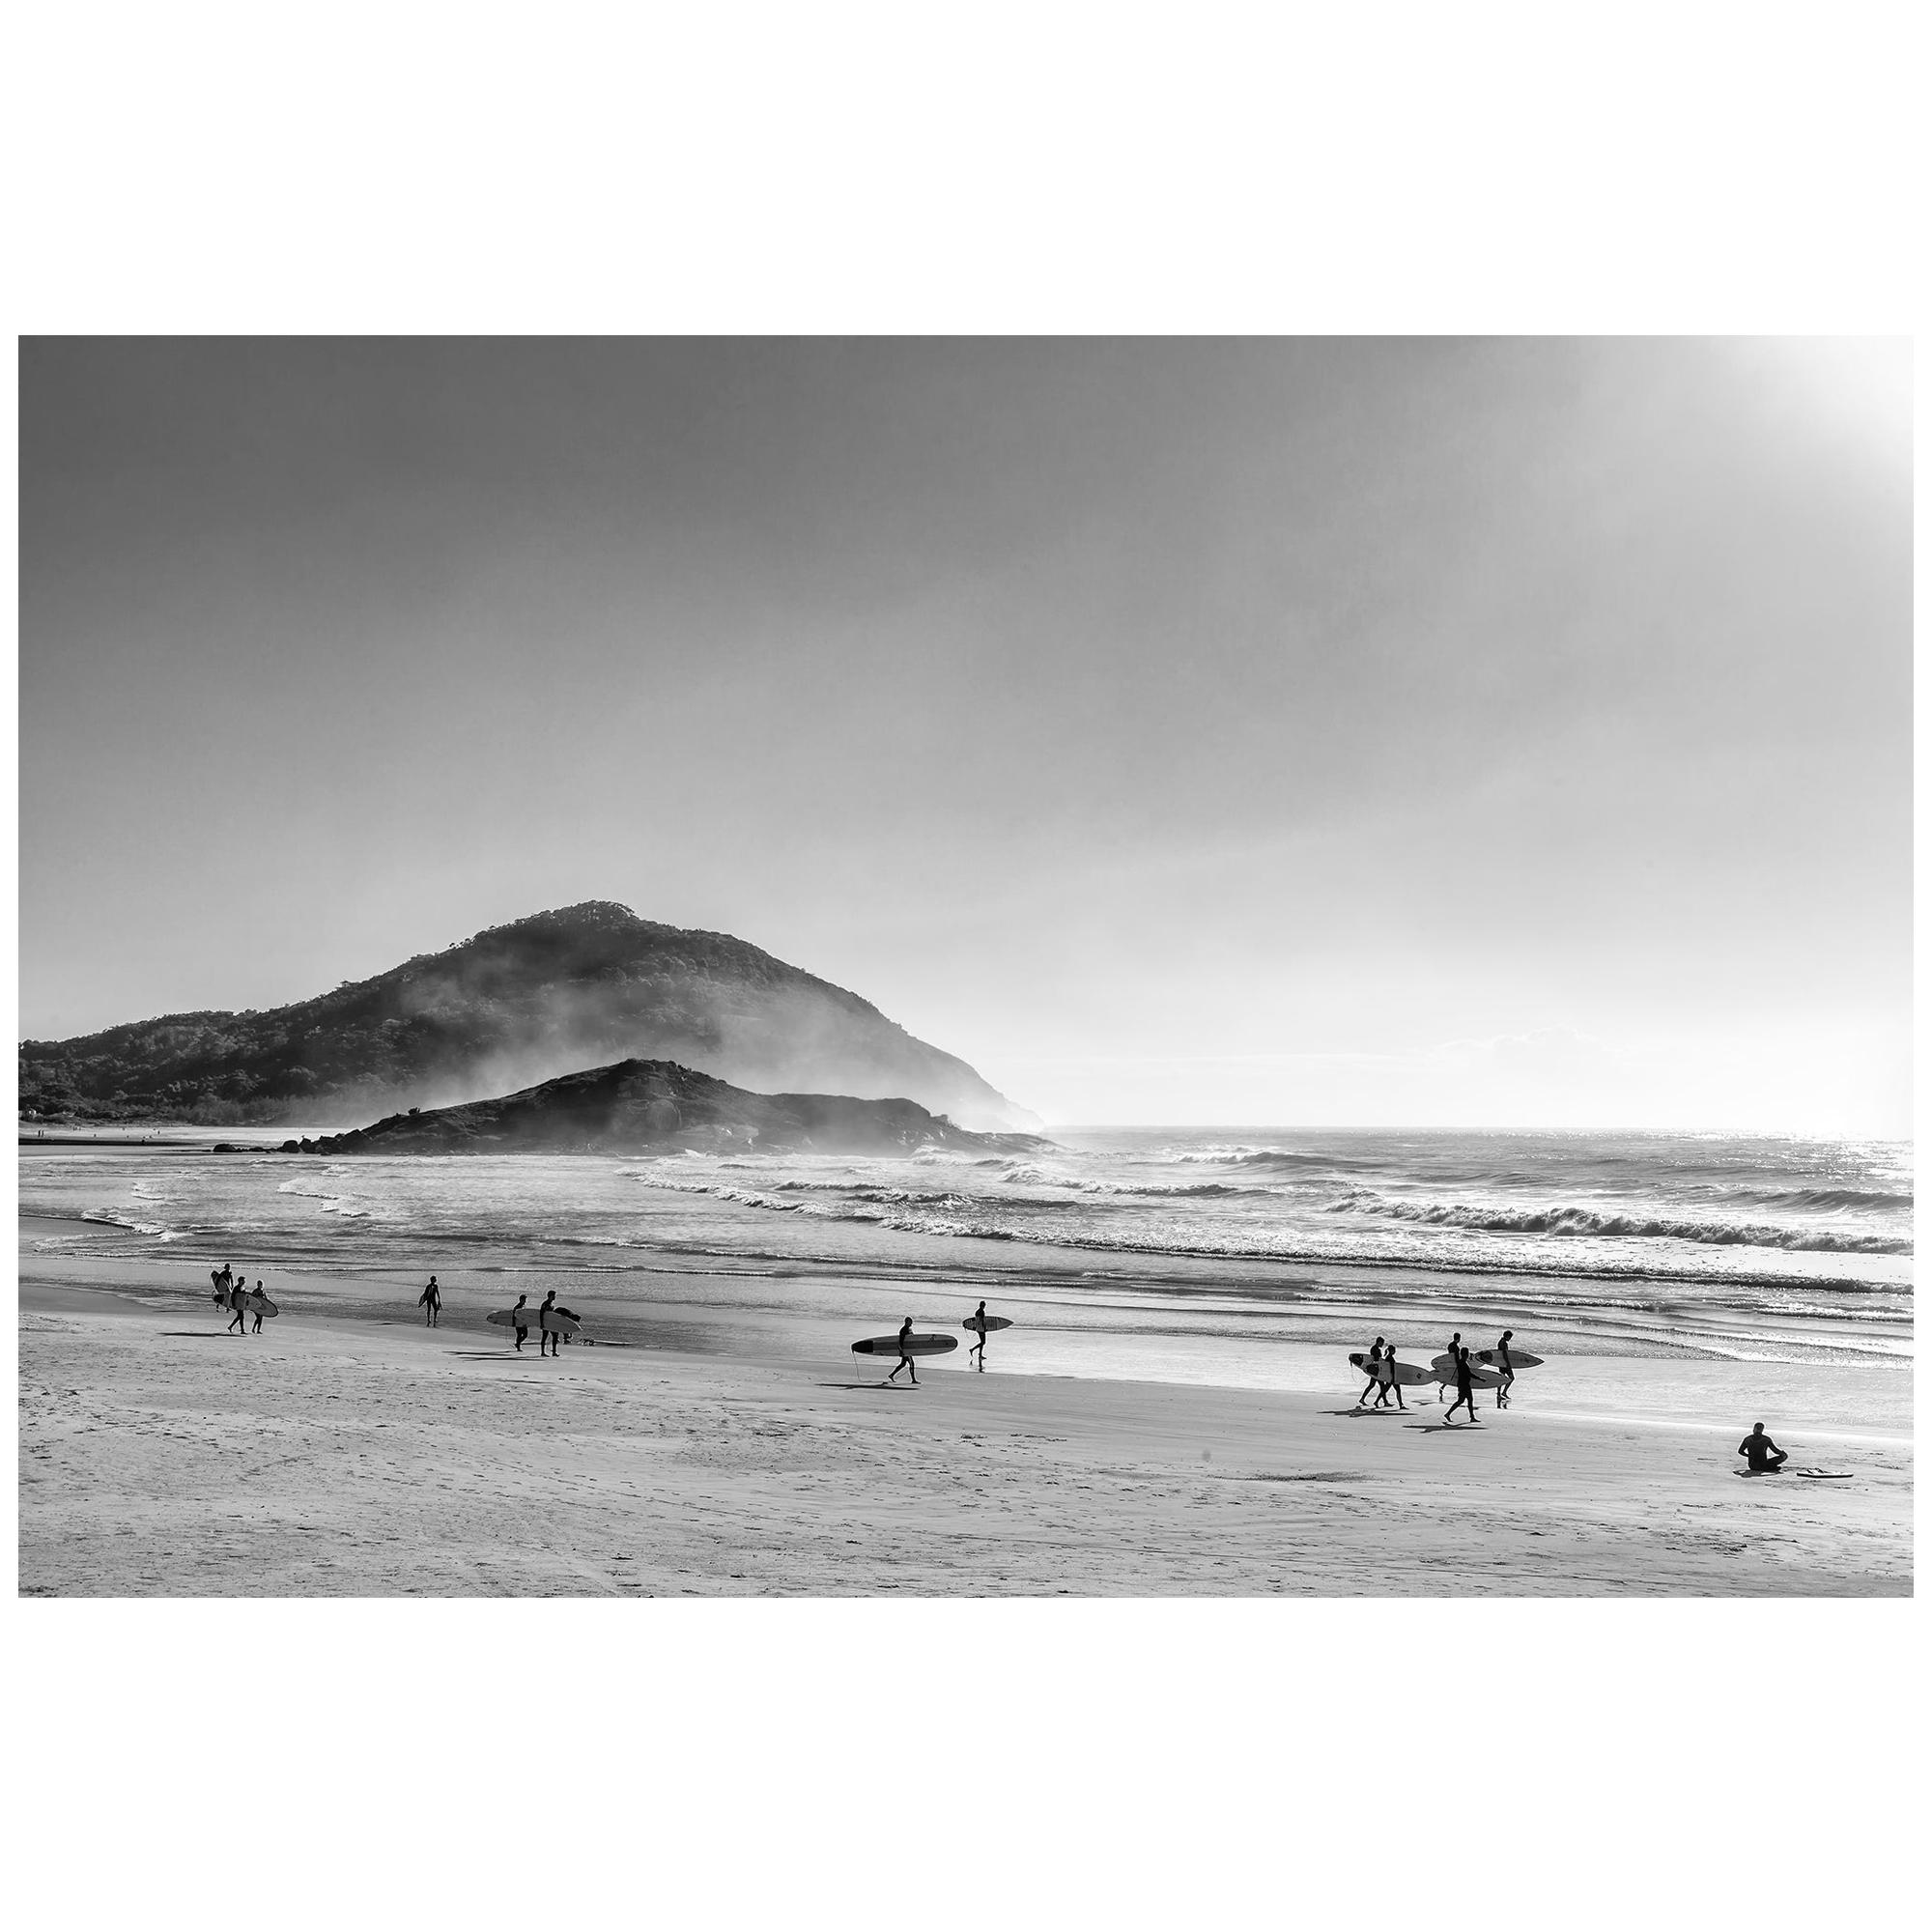 Photography "Surfers", 2015, by Brazilian Photographer Roberta Borges